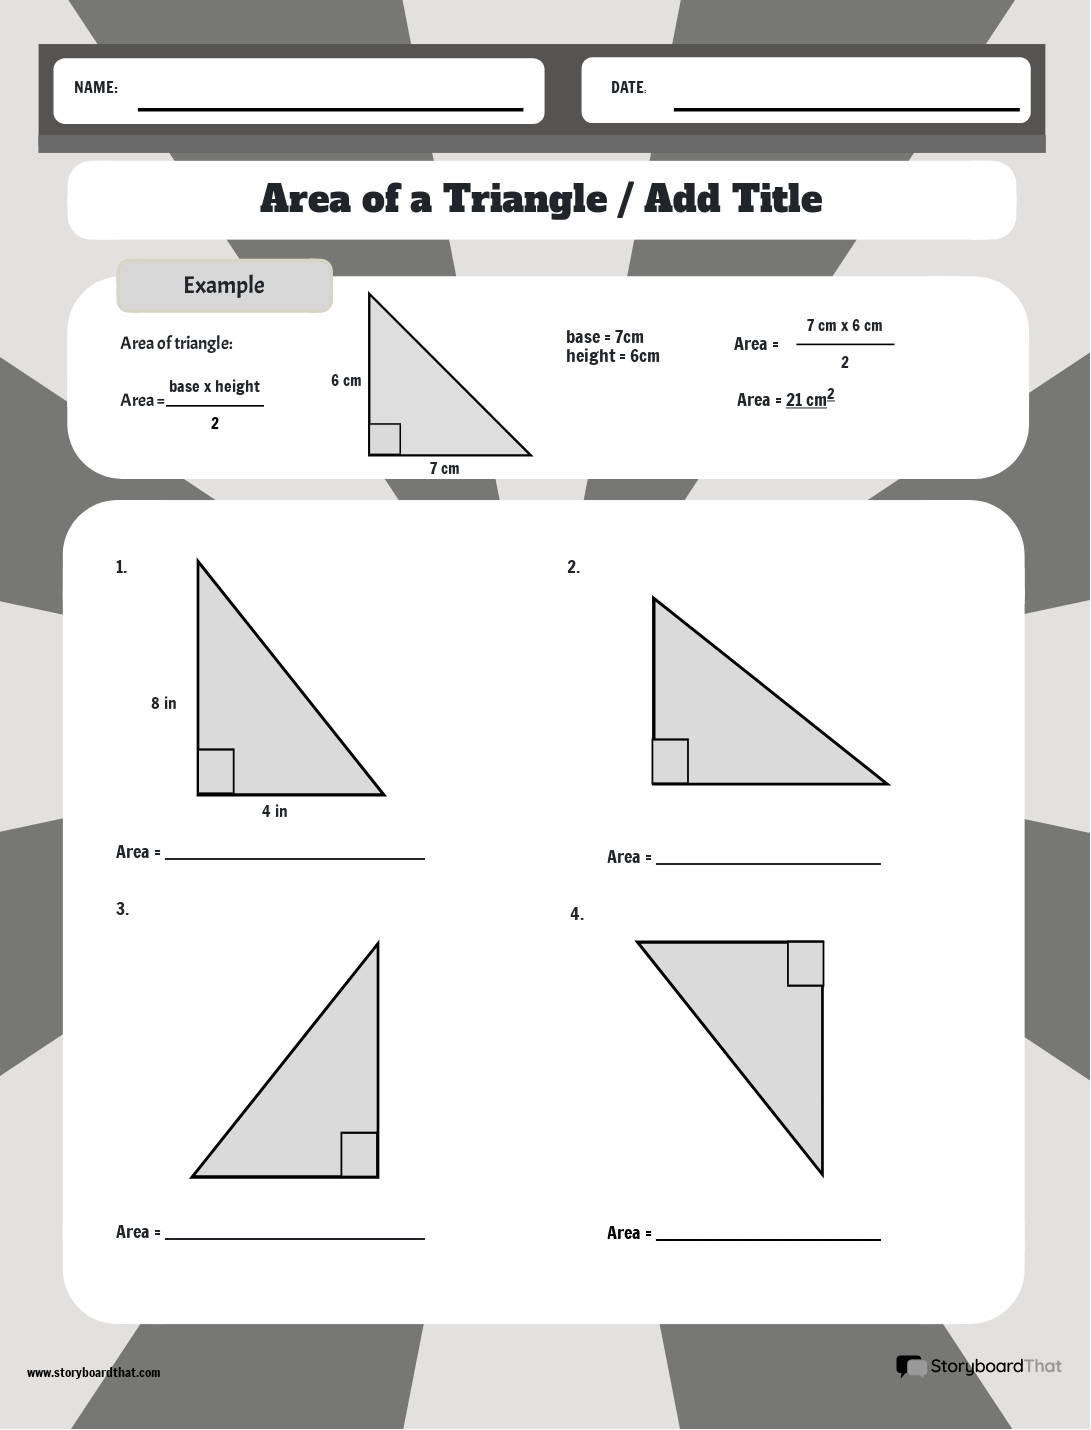 Area of a Triangle Worksheet with Geometric Background - BW